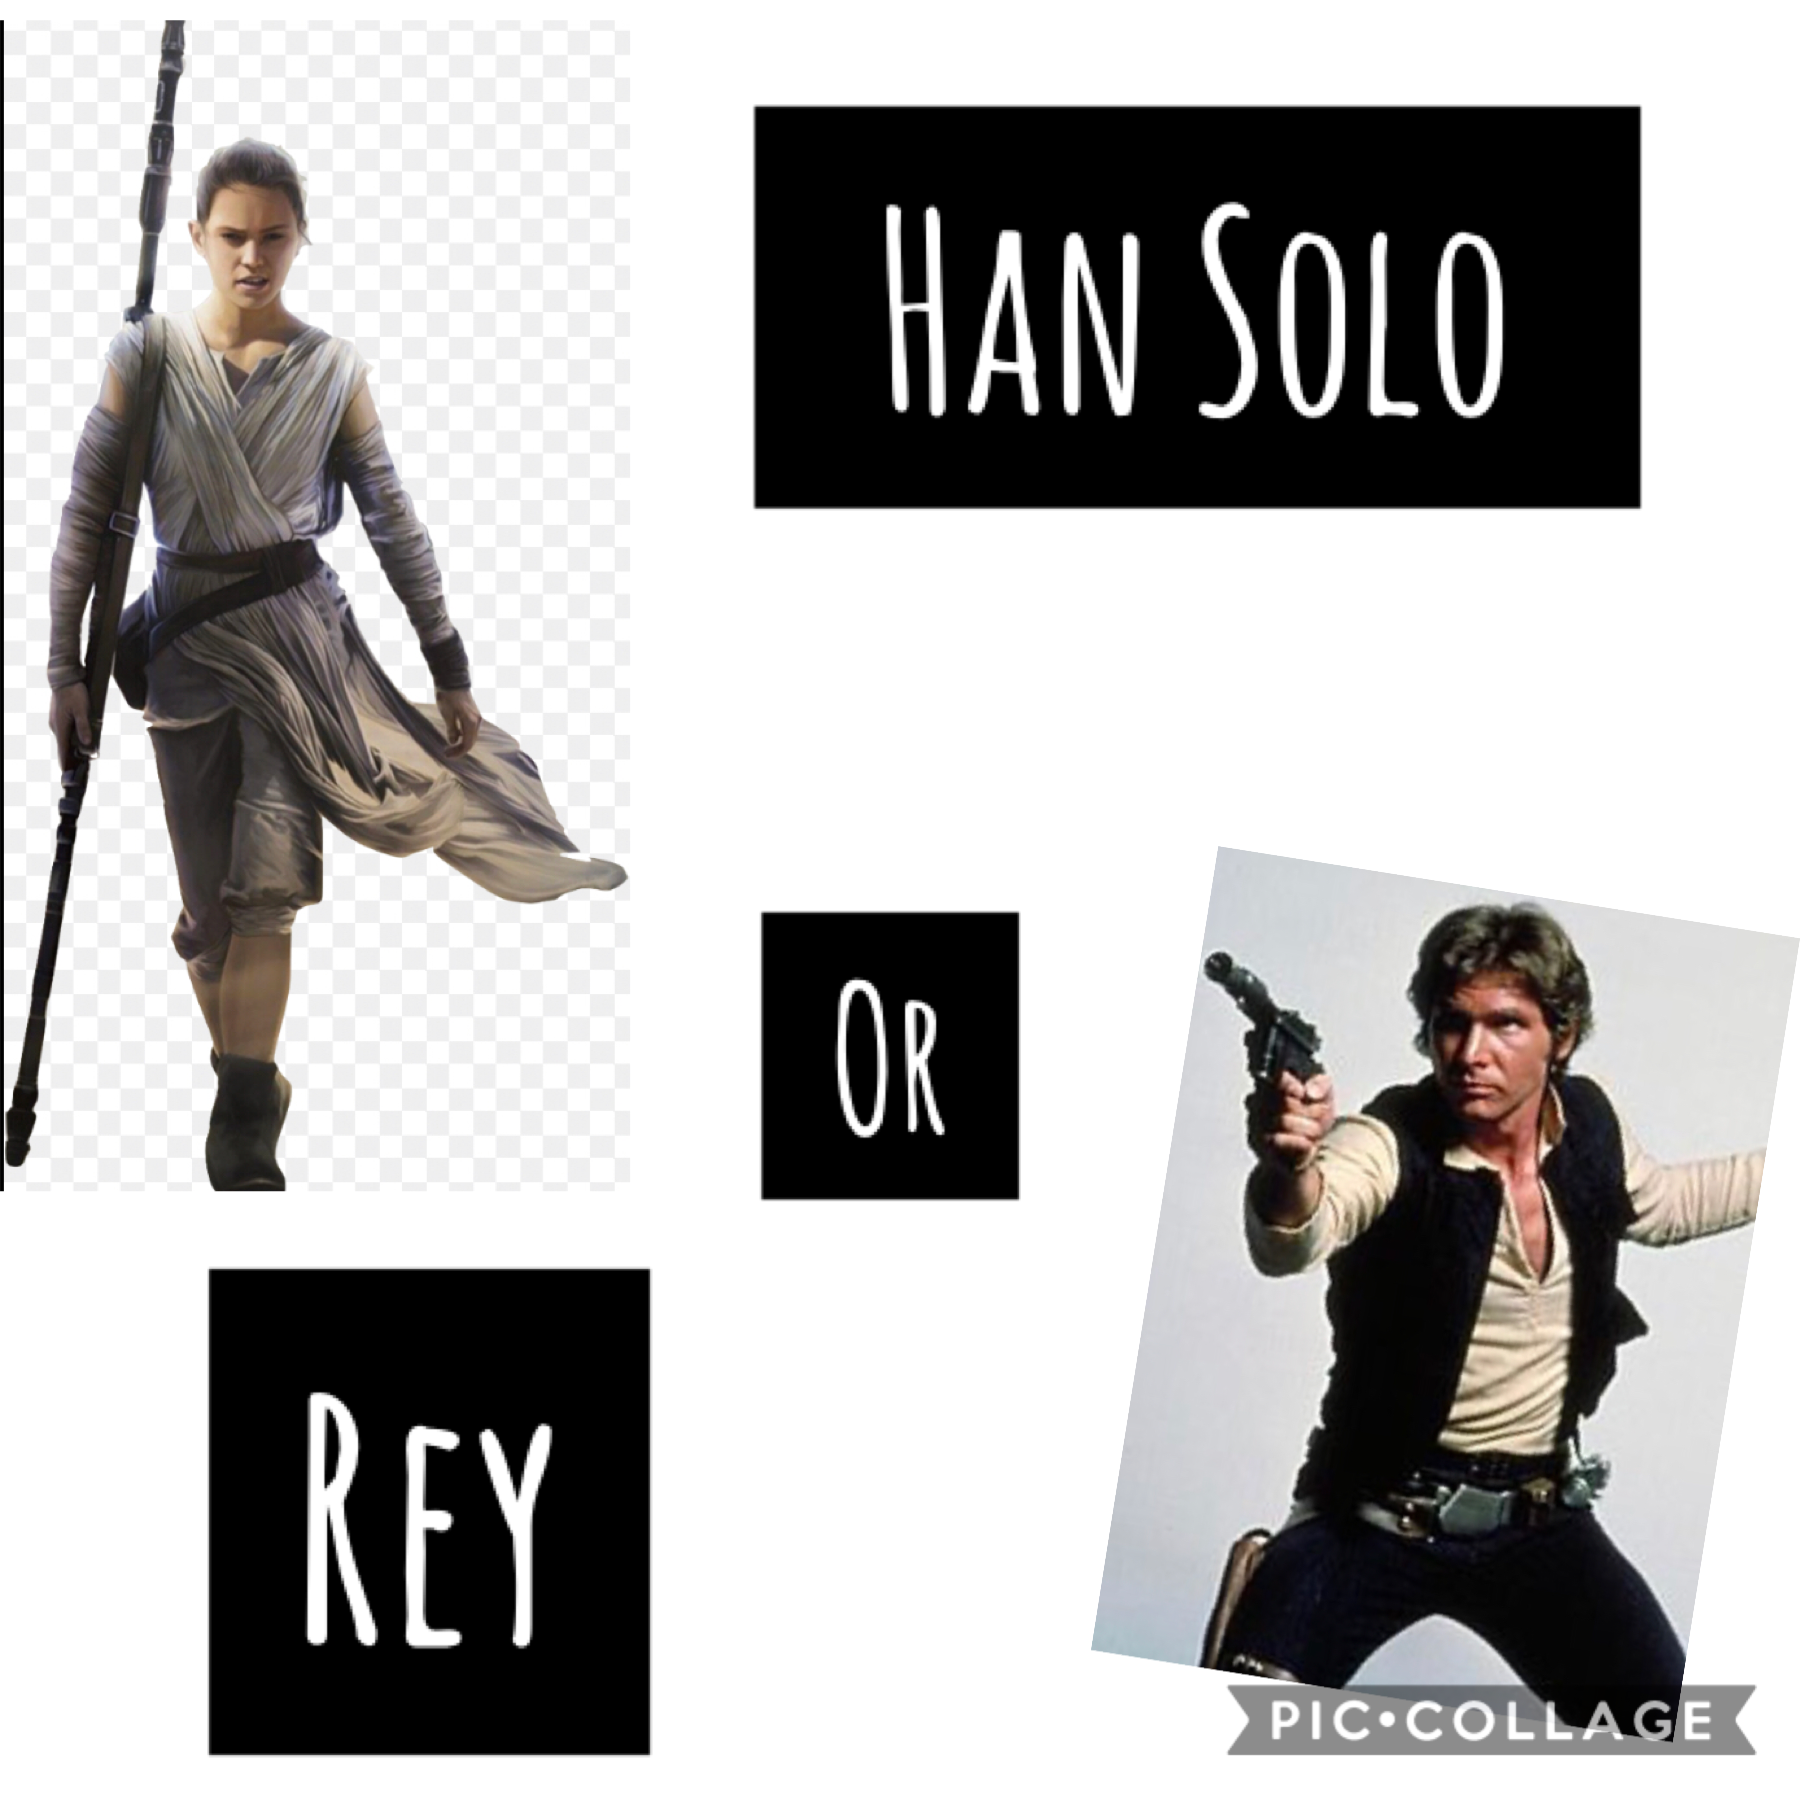 Comment which one Han Solo or Rey